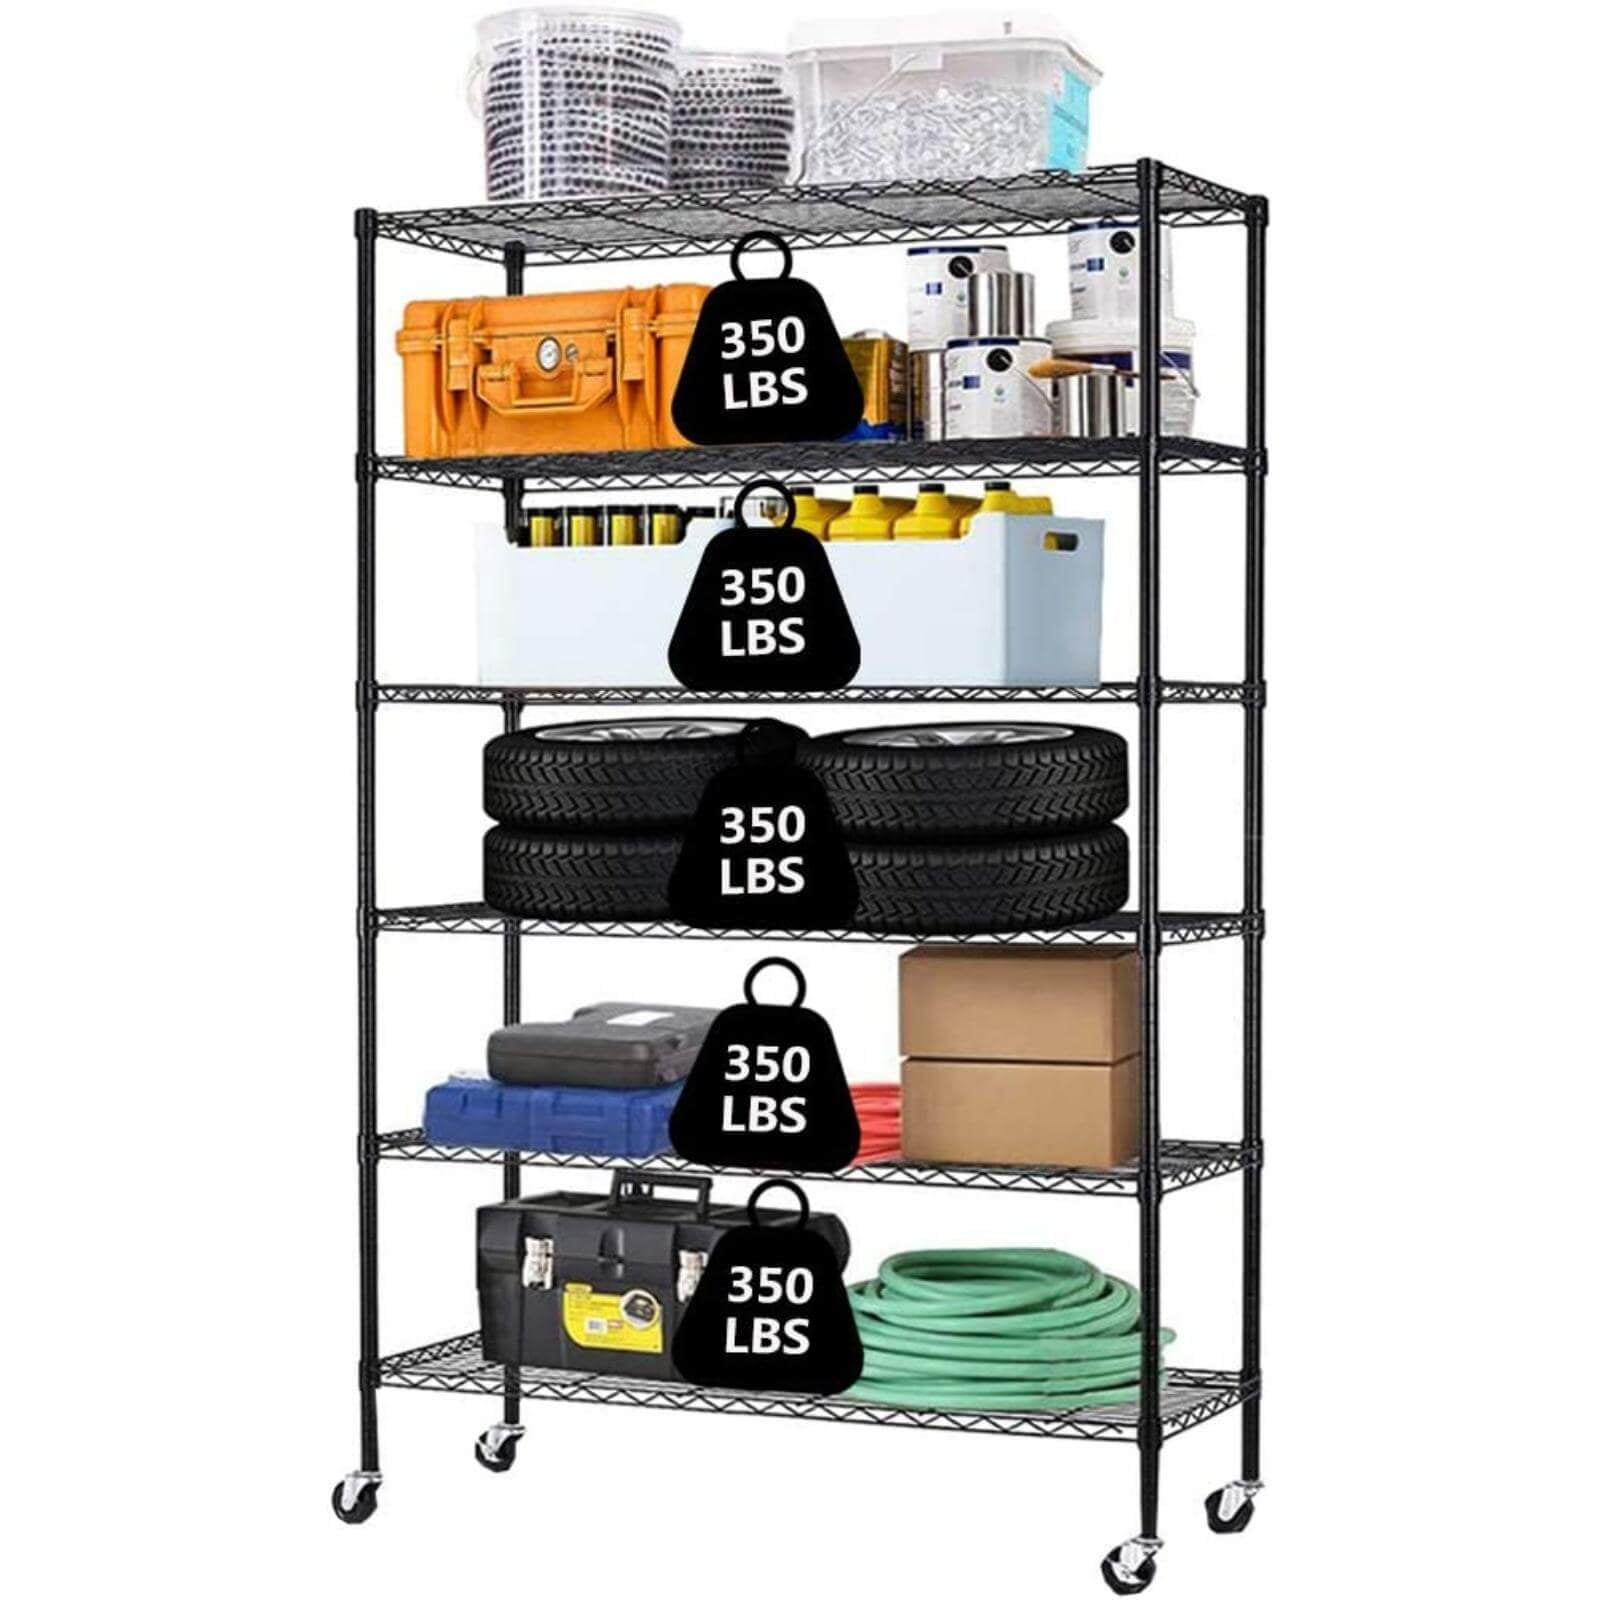 6-Tier Storage Shelves NSF Certified Wire Shelving Unit on Wheels Heavy  Duty Metal Shelves Adjustable Steel Shelving 2100Lbs Capacity for Closet